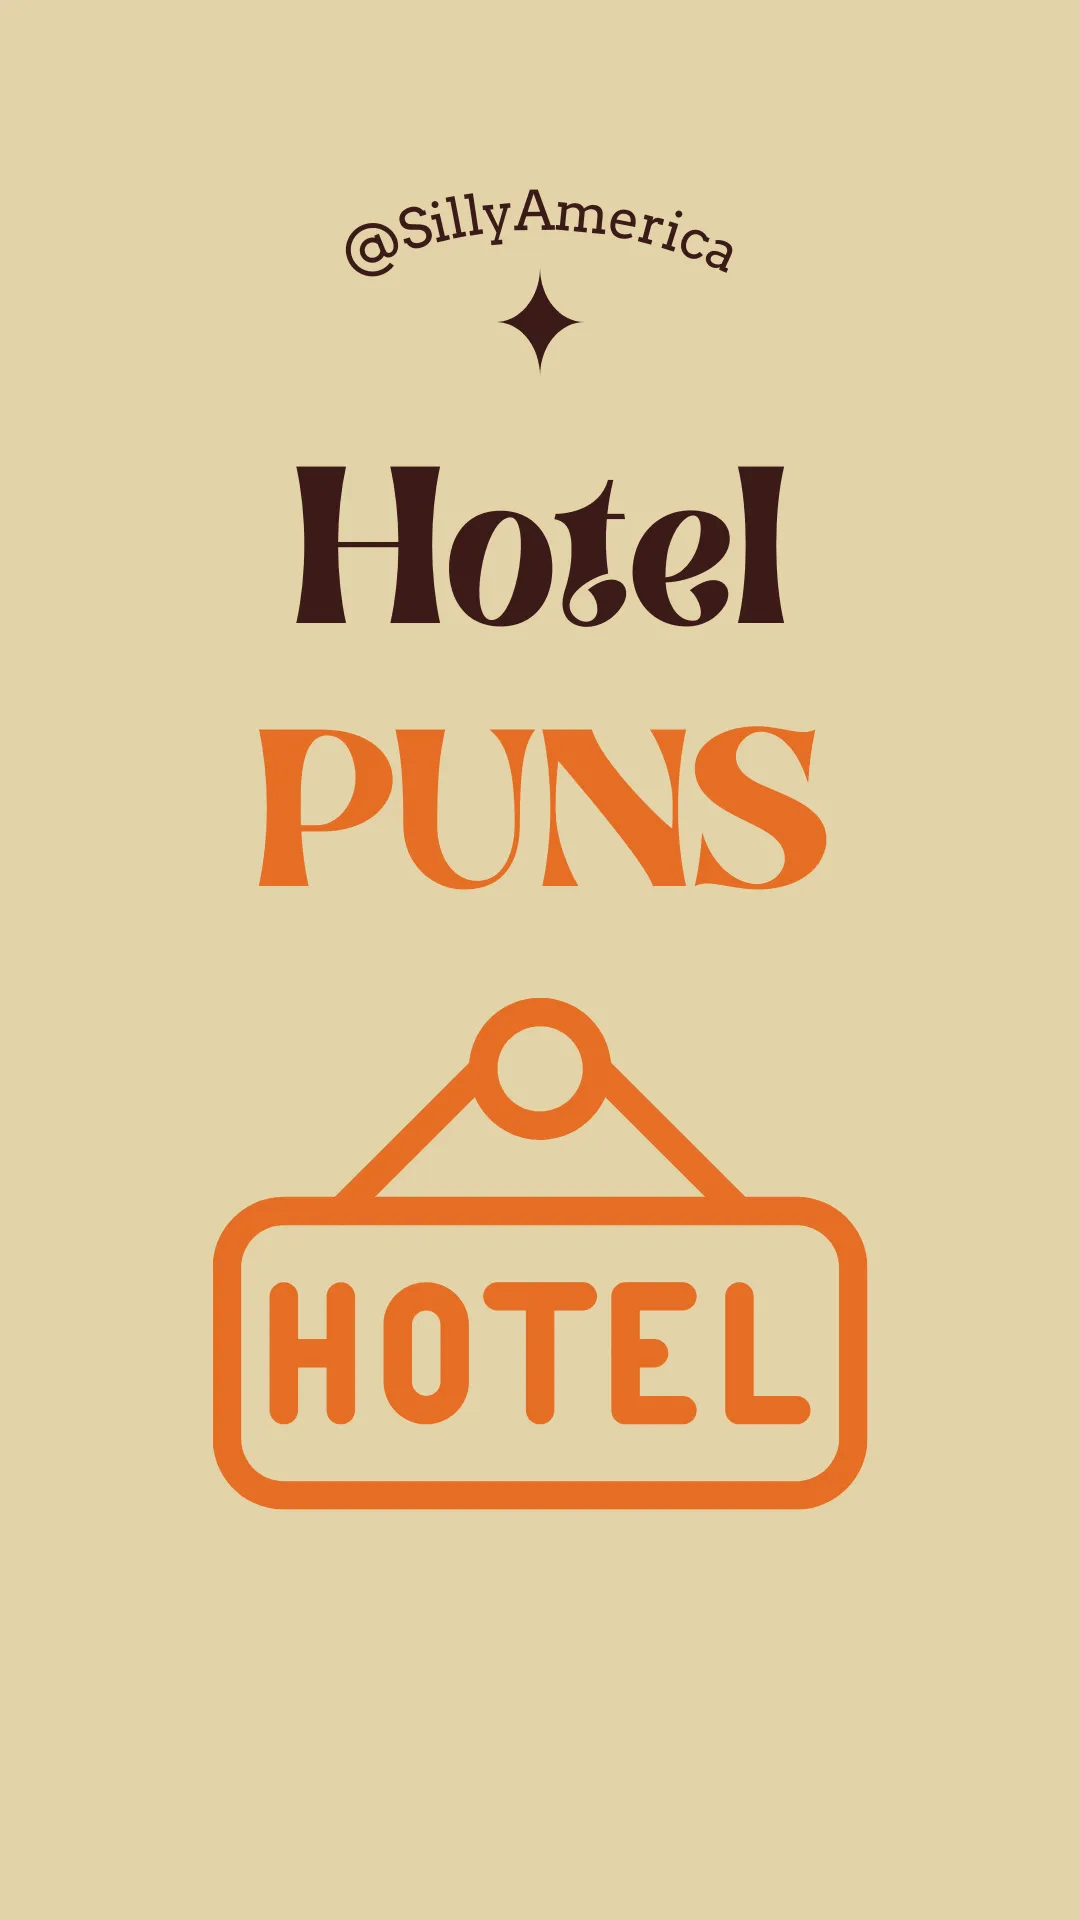 The best part of road trips is checking into your hotel at the end of the night for a cozy bed and a good night's sleep. If you're tempted to share your SUITE hotel room and are looking for the best hotel puns to use as captions for Instagram or other social media posts, these dad-joke worthy wordplays are for you! Use these funny hotel puns as Instagram captions for your travel photos or just to have a good chuckle. #HotelPuns #Hotels #RoadTrip #RoadTrips #RoadTripPlanning